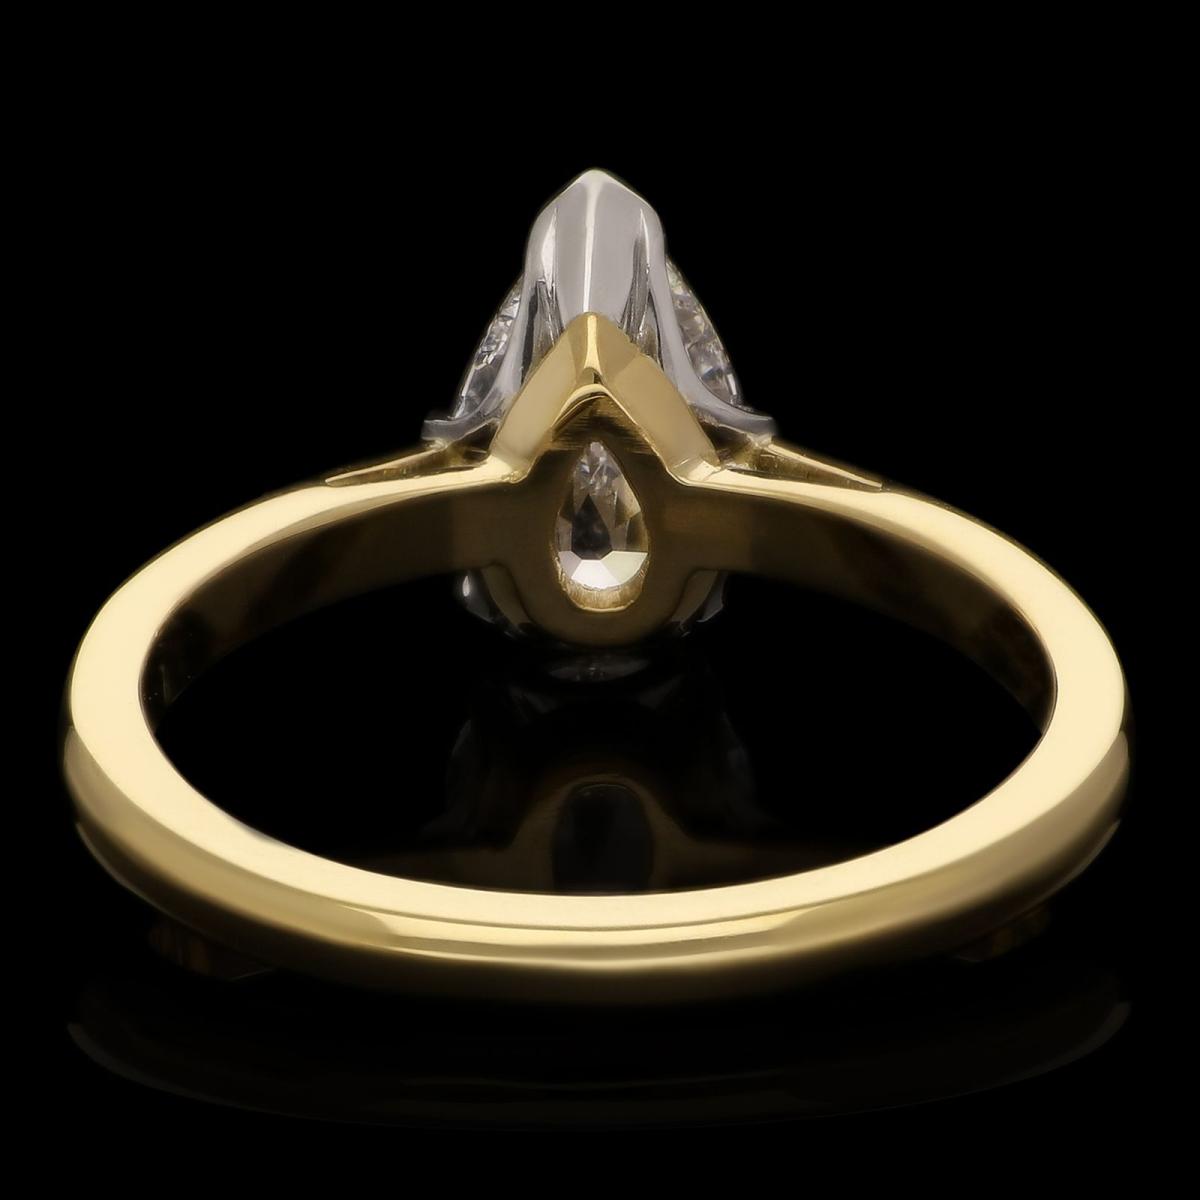 Hancocks 1.00ct Antique Cut Pear Shape Diamond Solitaire Ring In 18ct Gold